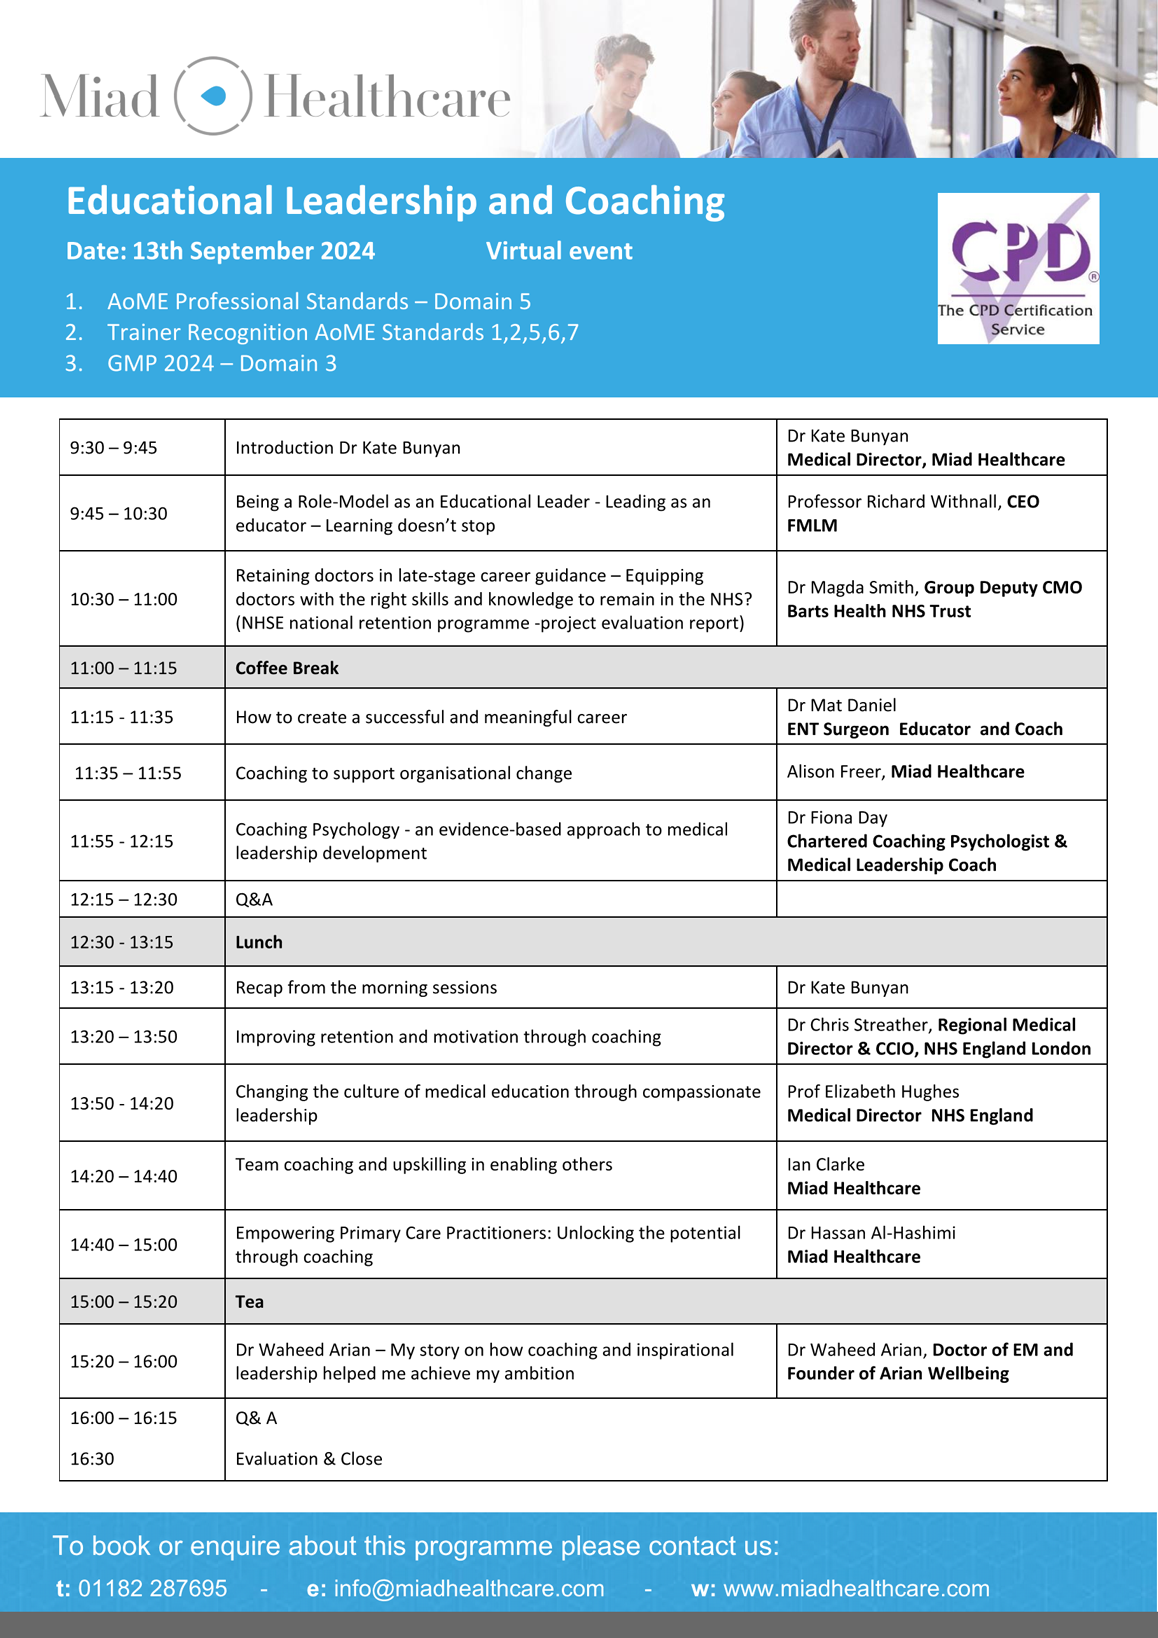 Educational Leadership and Coaching Event - Programme schedule September 13 2024